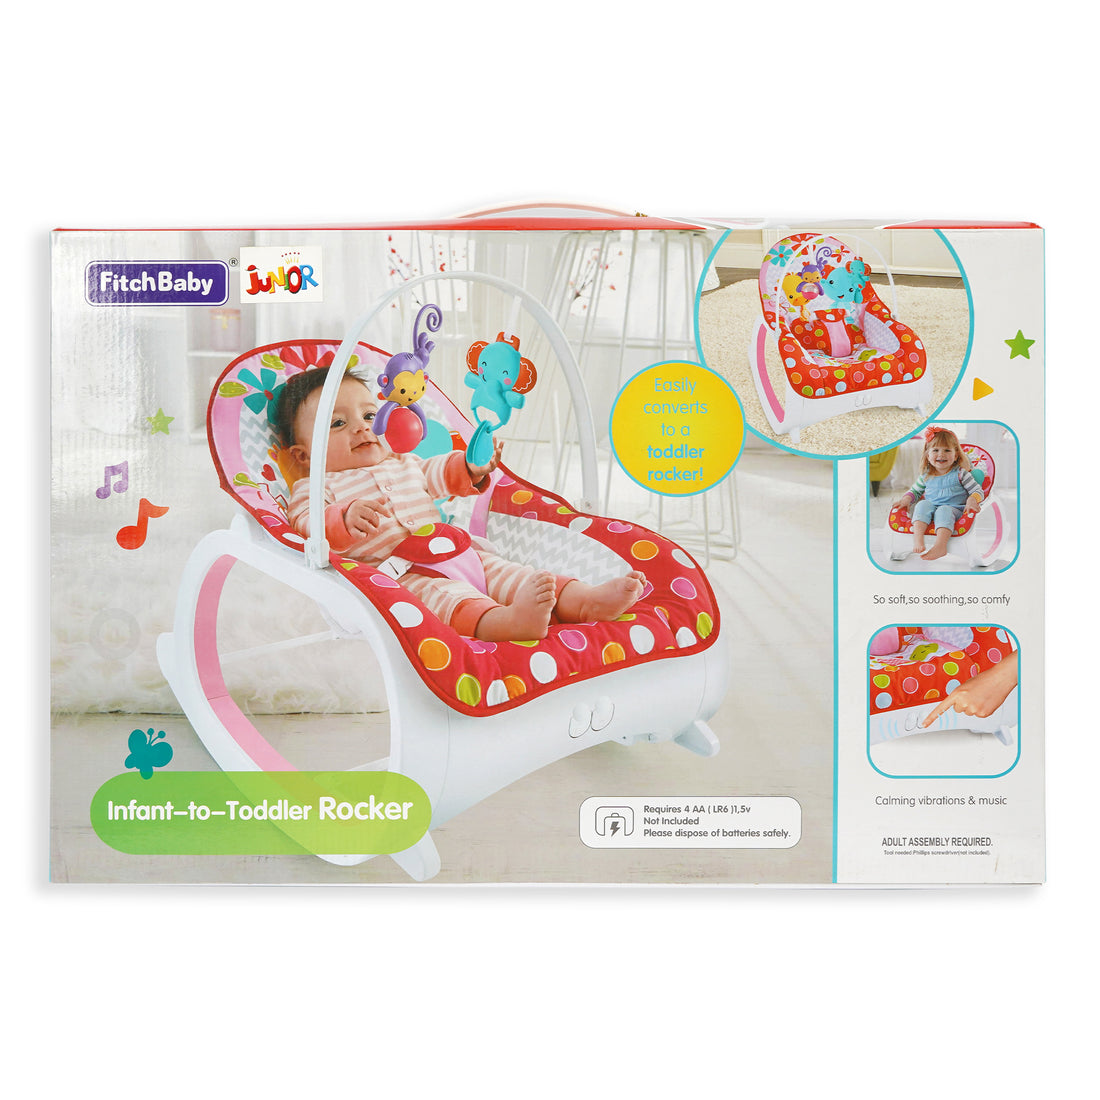 Colorful Infant-to-Toddler Secure Bouncer Rocker with Playful Activity Bar